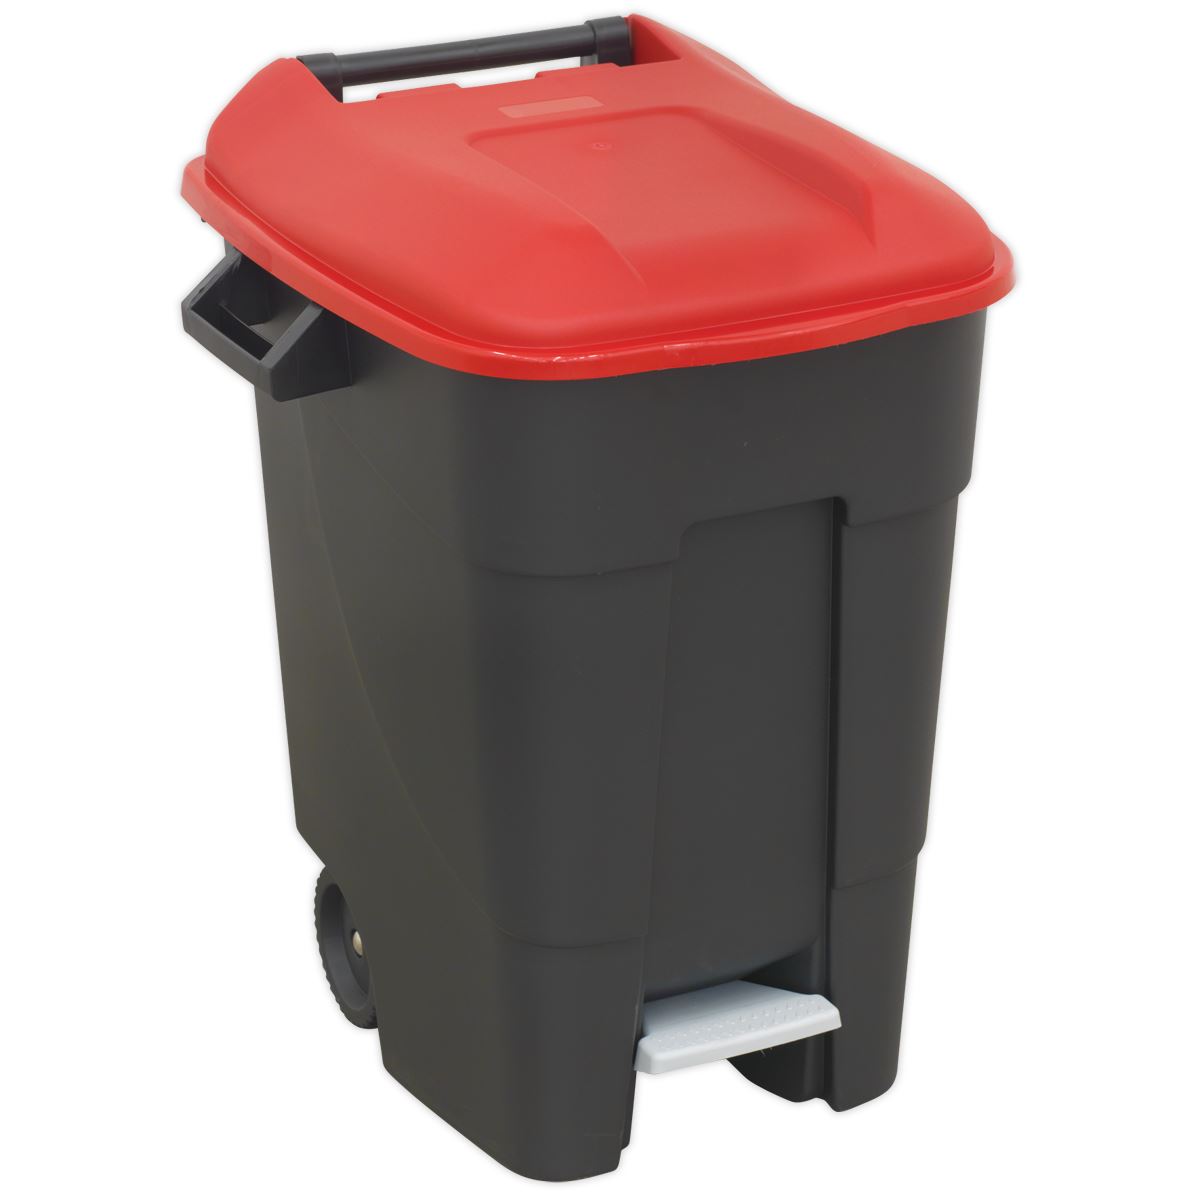 Sealey Refuse/Wheelie Bin with Foot Pedal 100L - Red